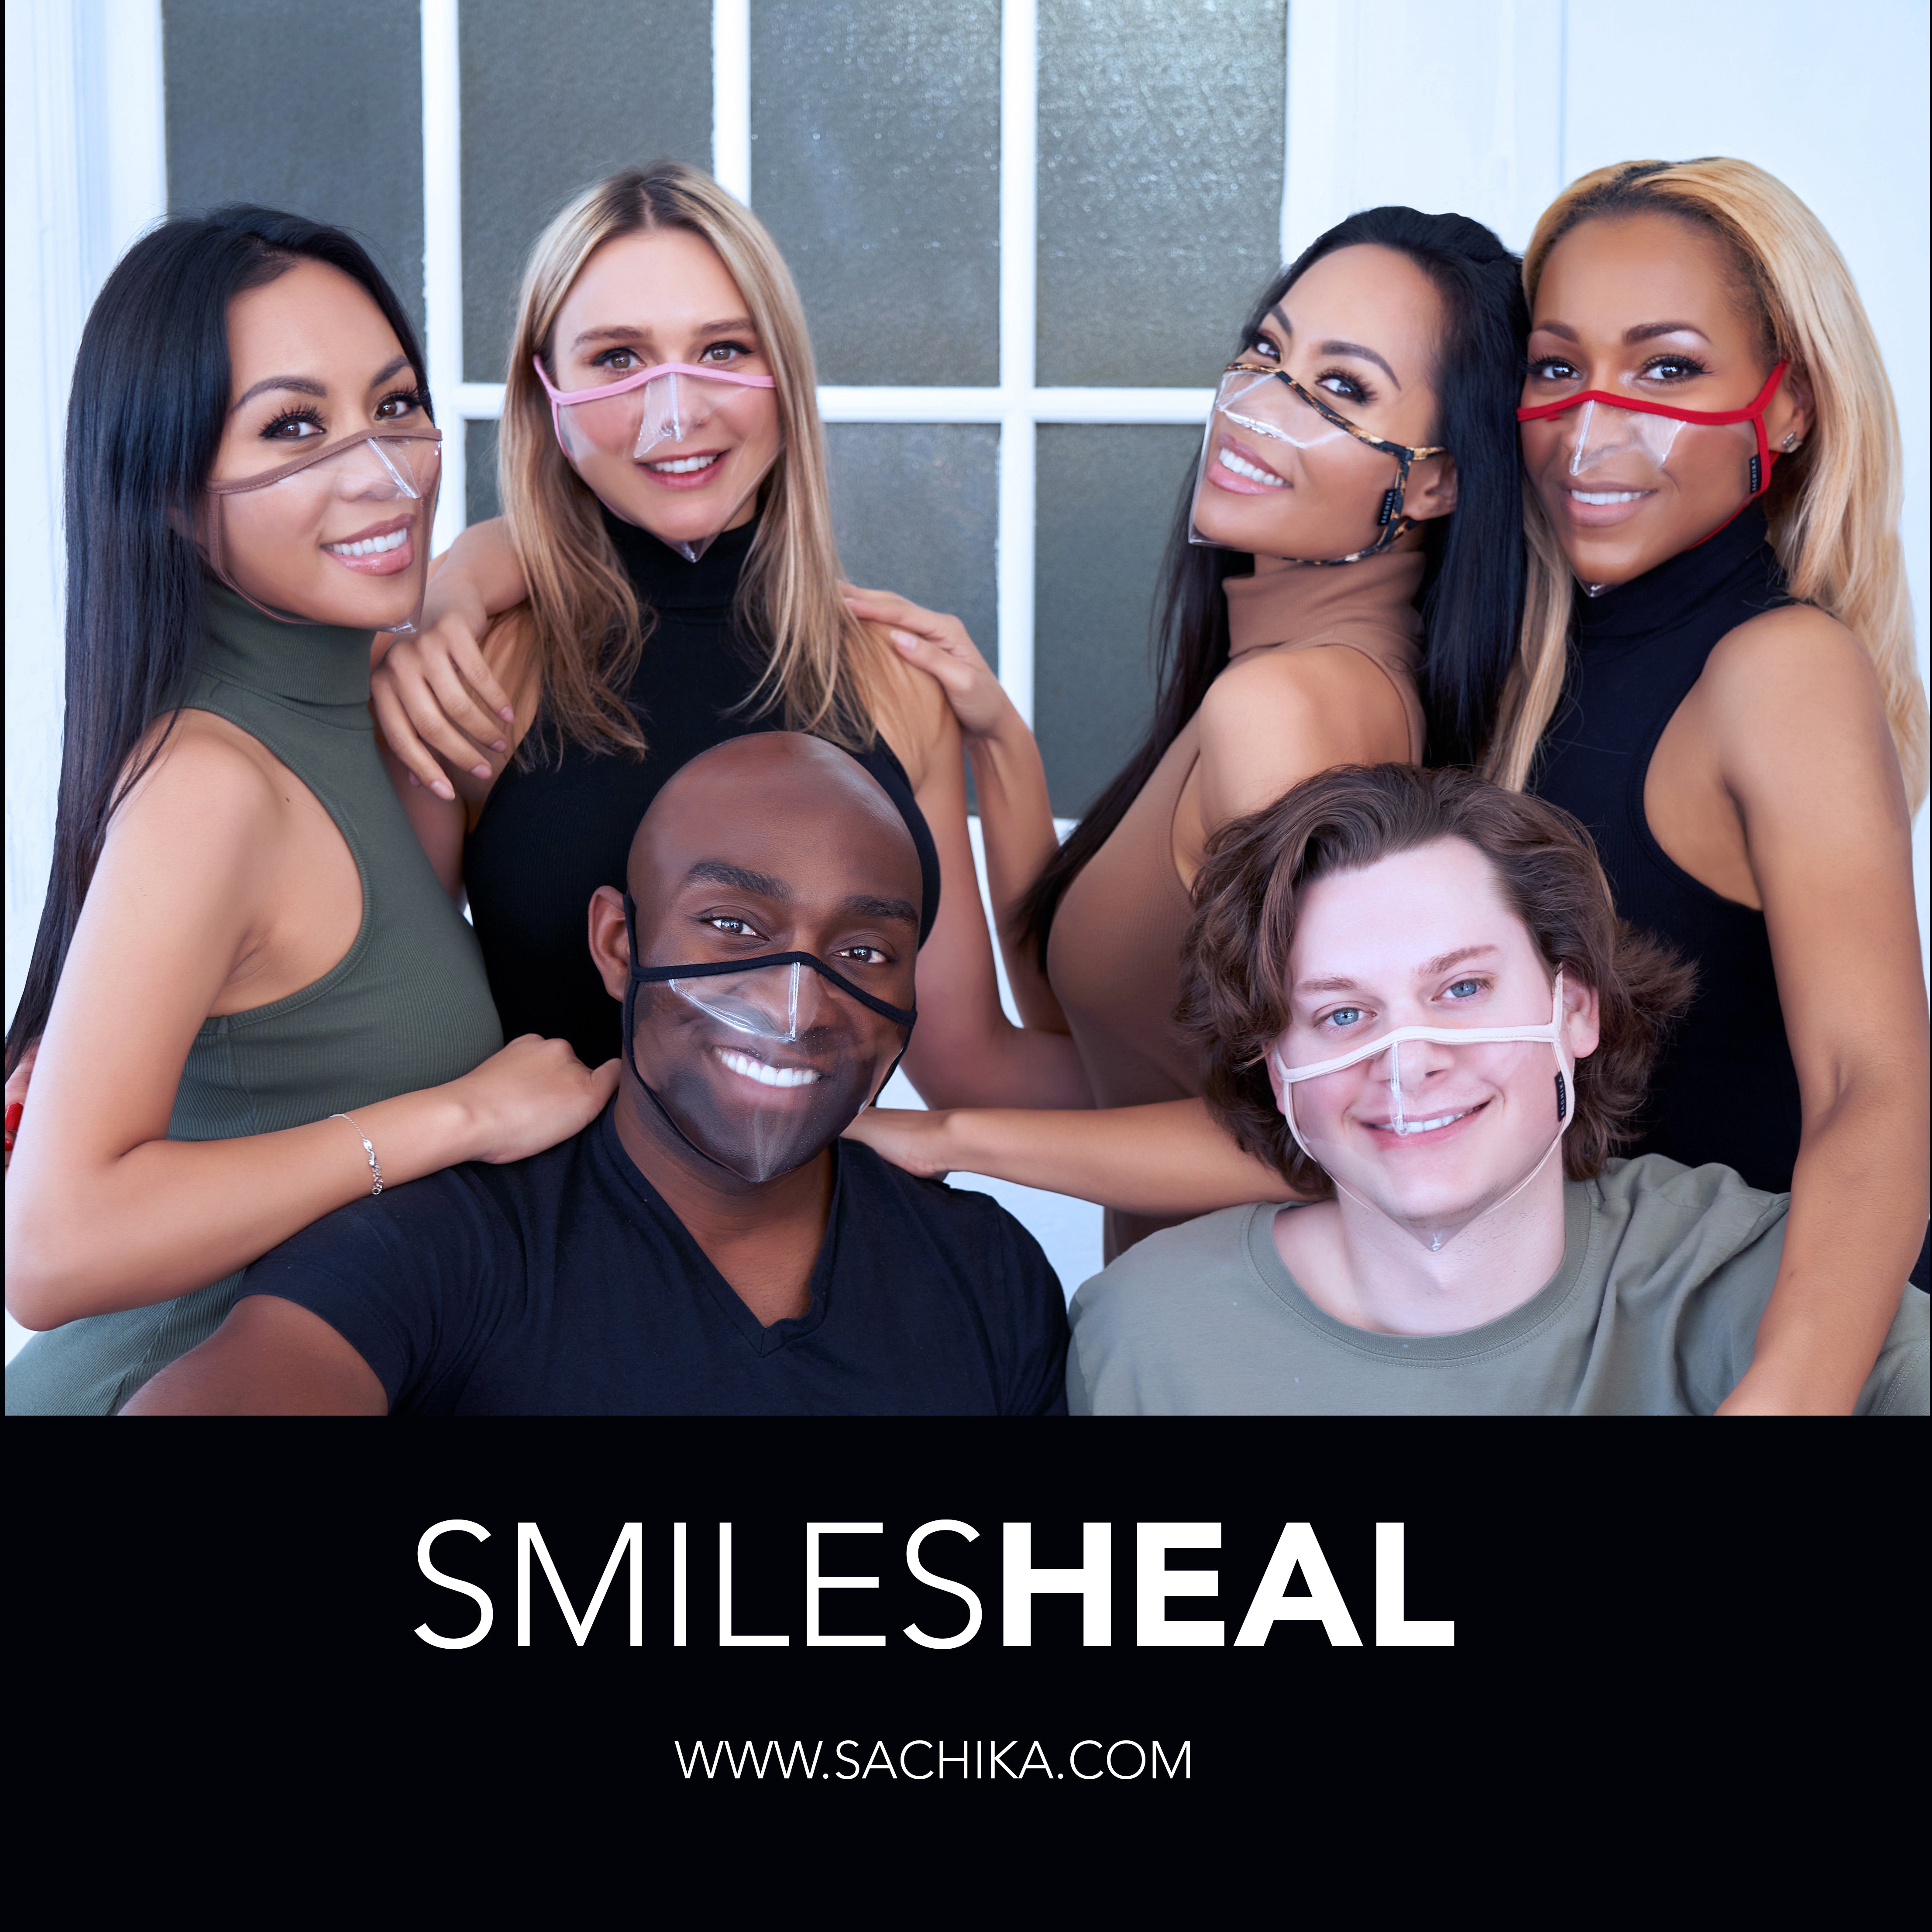 Reveal WHITE Face Mask 100% Transparent Clear Mask by SACHIKA Made in the USA - SACHIKA® - Official Site 